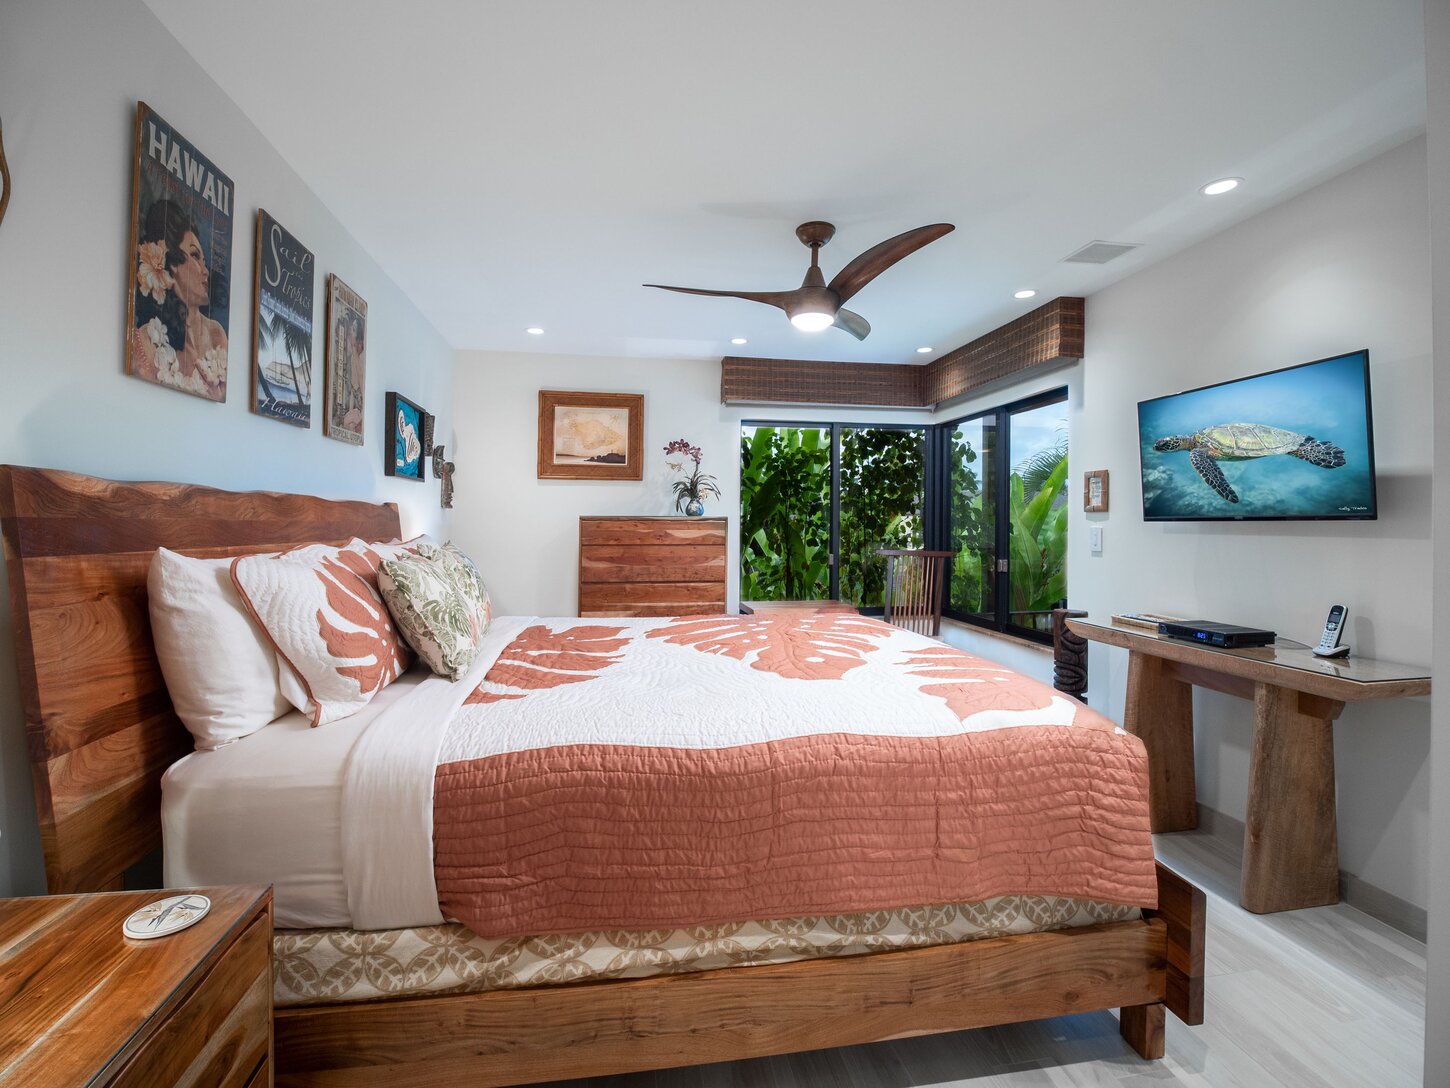 Guest bedroom also has a 40-inch smart 4K TV and a modest ocean view